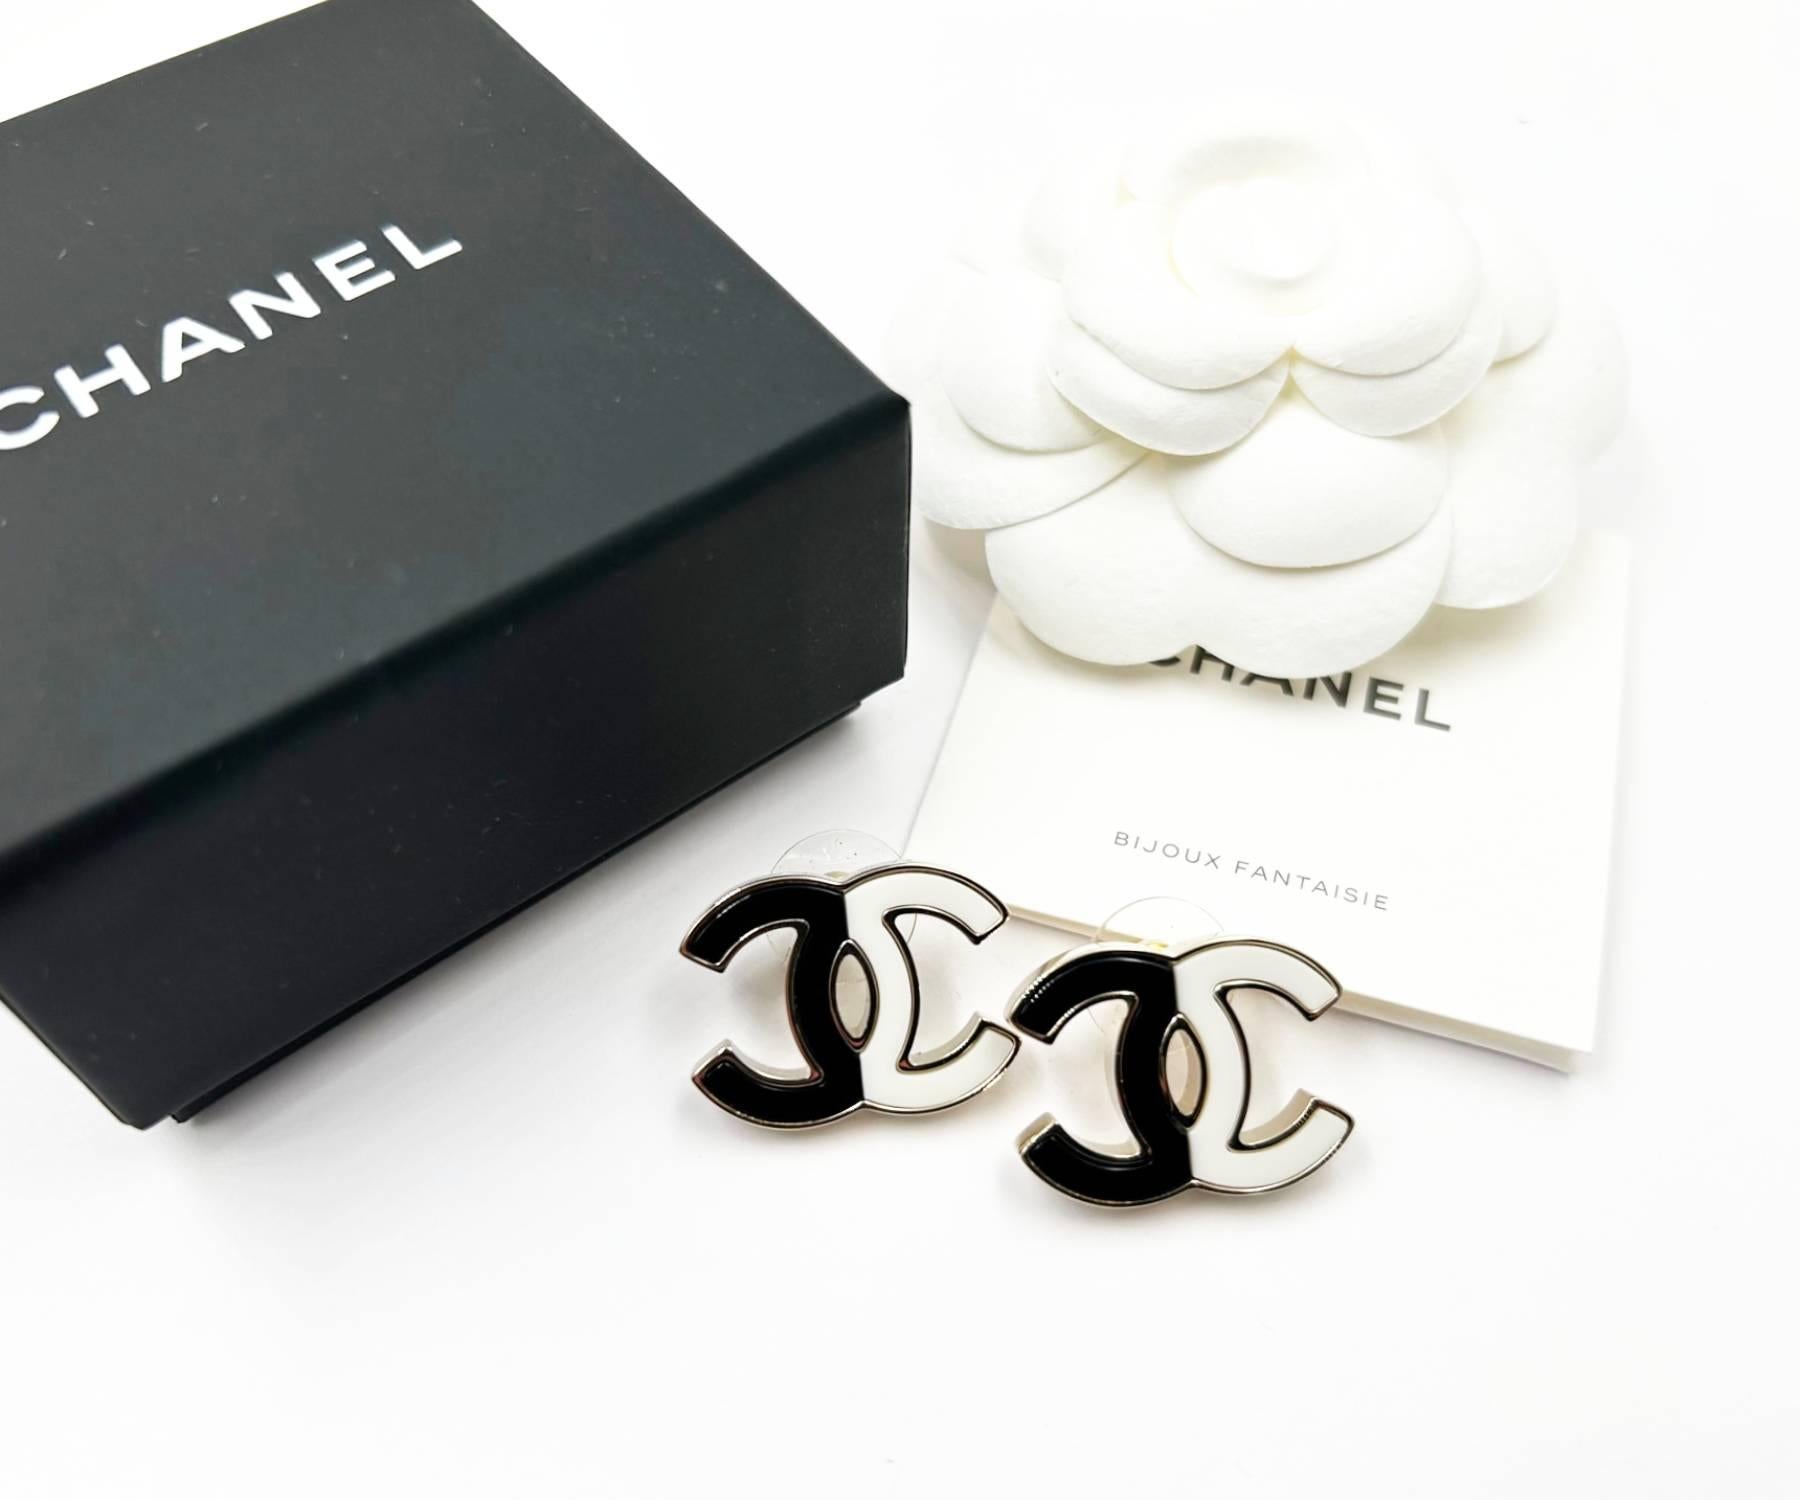 Chanel Brand New Gold CC Black White Half Half Piercing Earrings

*Marked 23
*Made in Italy
*Comes with the original box, pouch, booklet, ribbon and camellia flower
*Brand New

-It is approximately 1